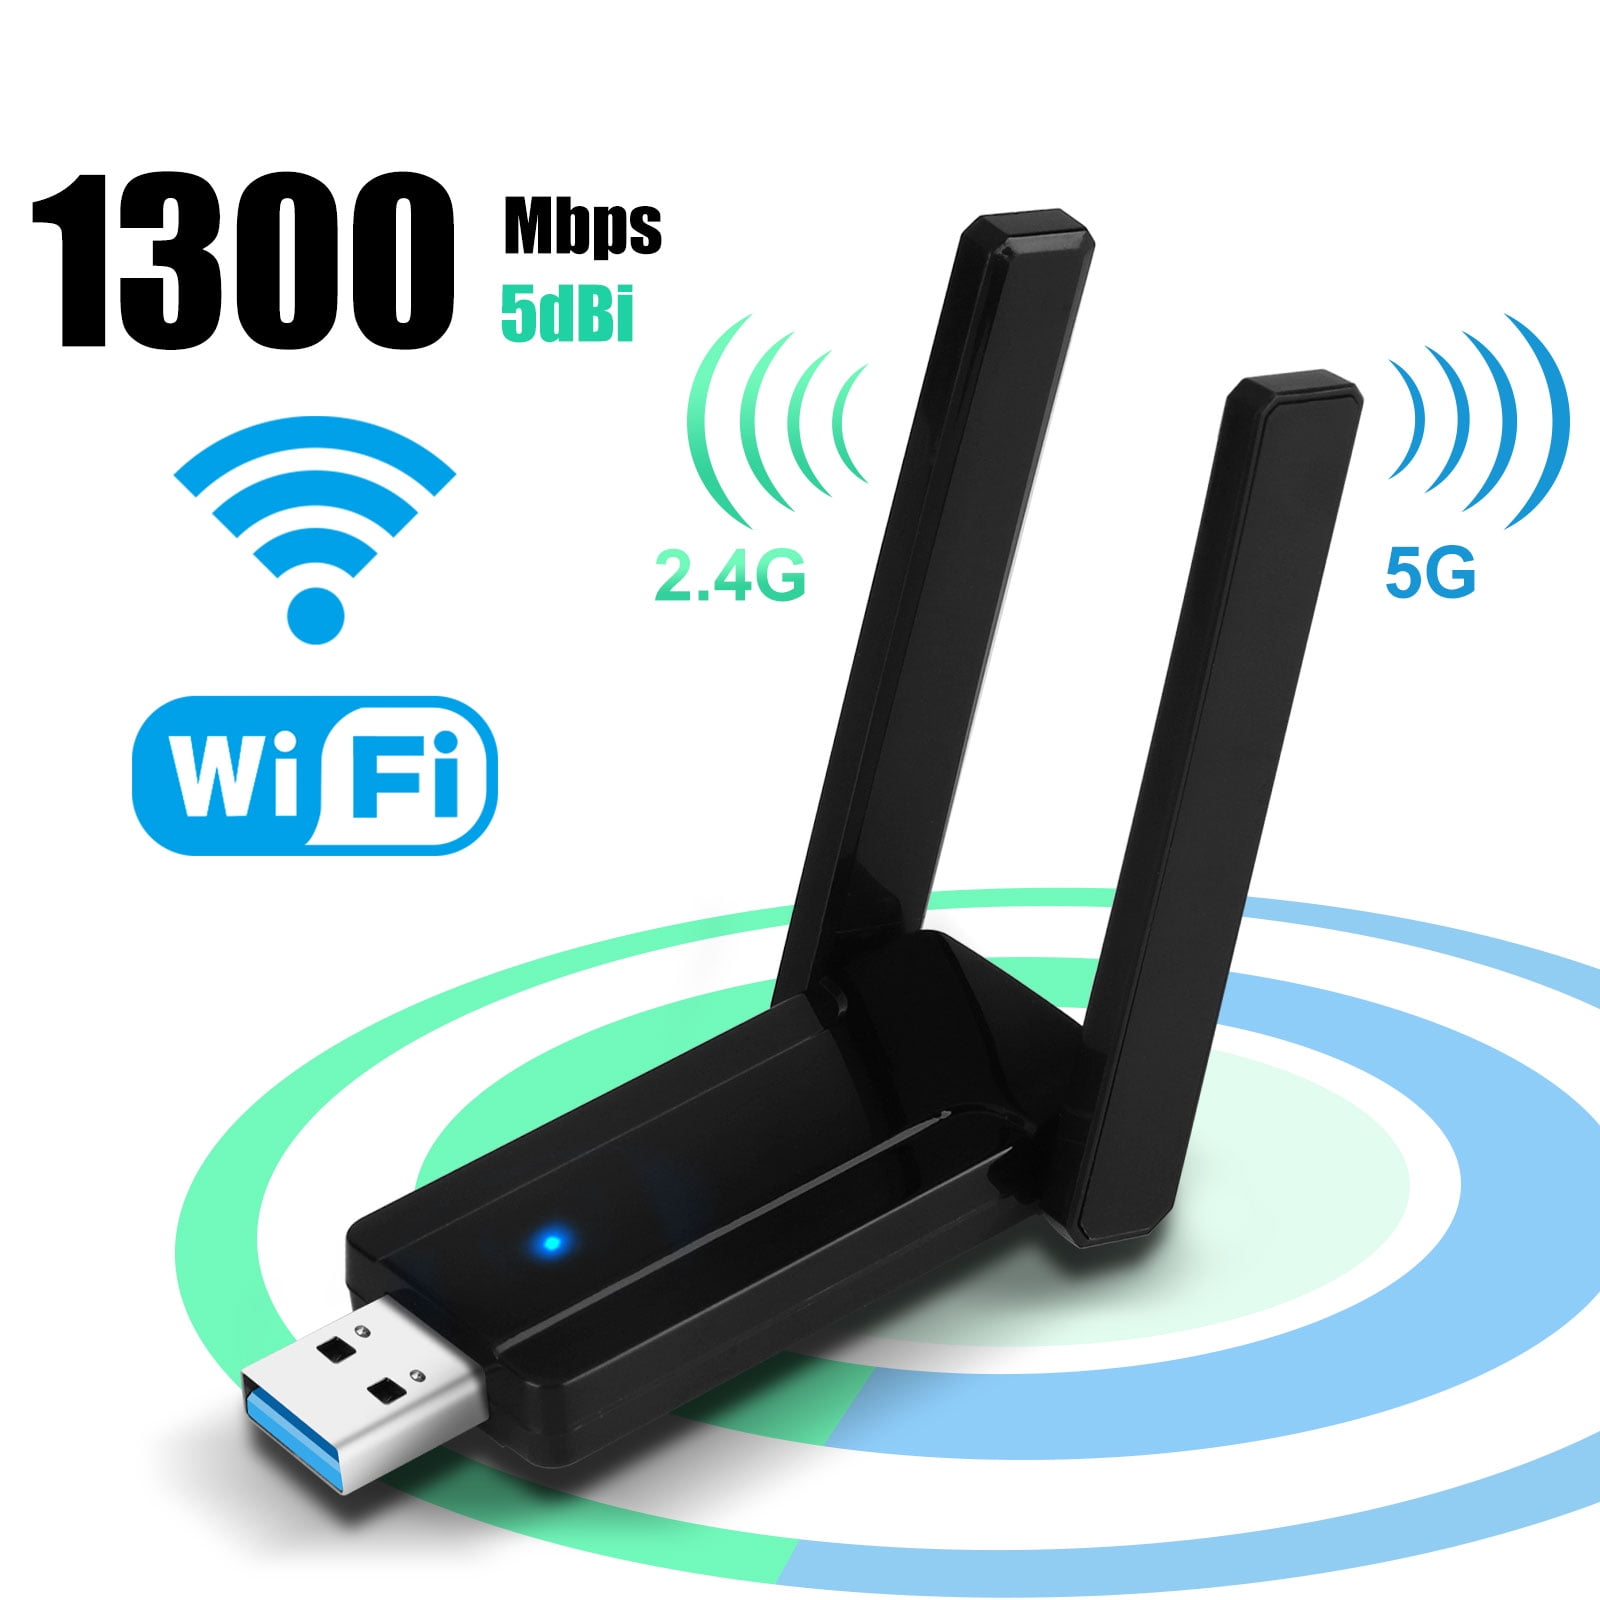 EEEkit USB WiFi Adapter for PC 1300Mbps Dual Band 2.4GHz/5GHz Fast USB3